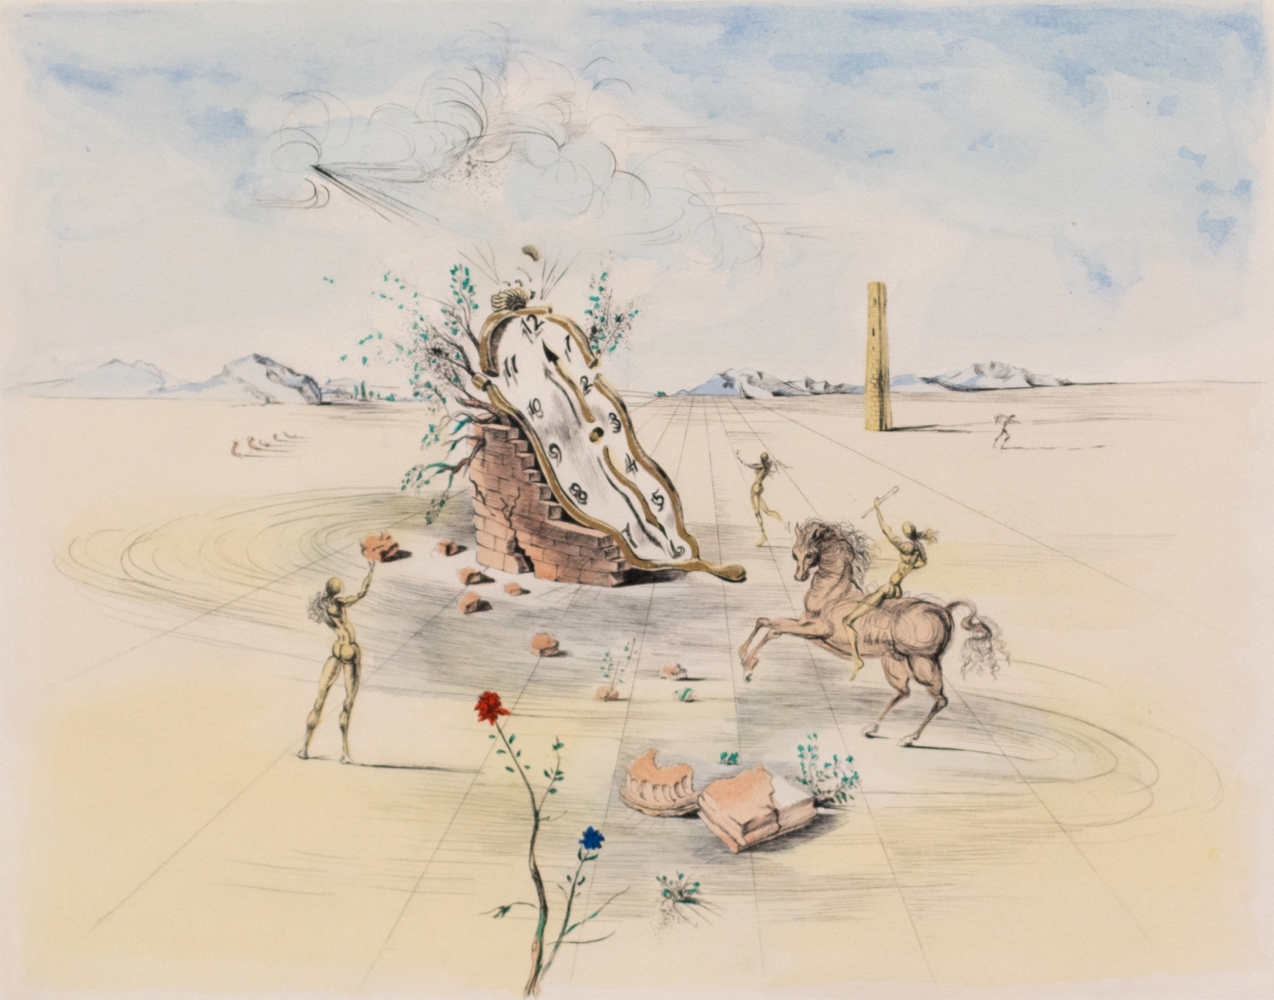 Salvador Dali, Cosmic Horseman, 1982, Color Lithograph on paper, 19.25 x 21.25 inches, Frame size-30.25 x 32.25 inches, Edition 168 of 300, Salvador Dali signed prints, Salvador Dali Prints for sale